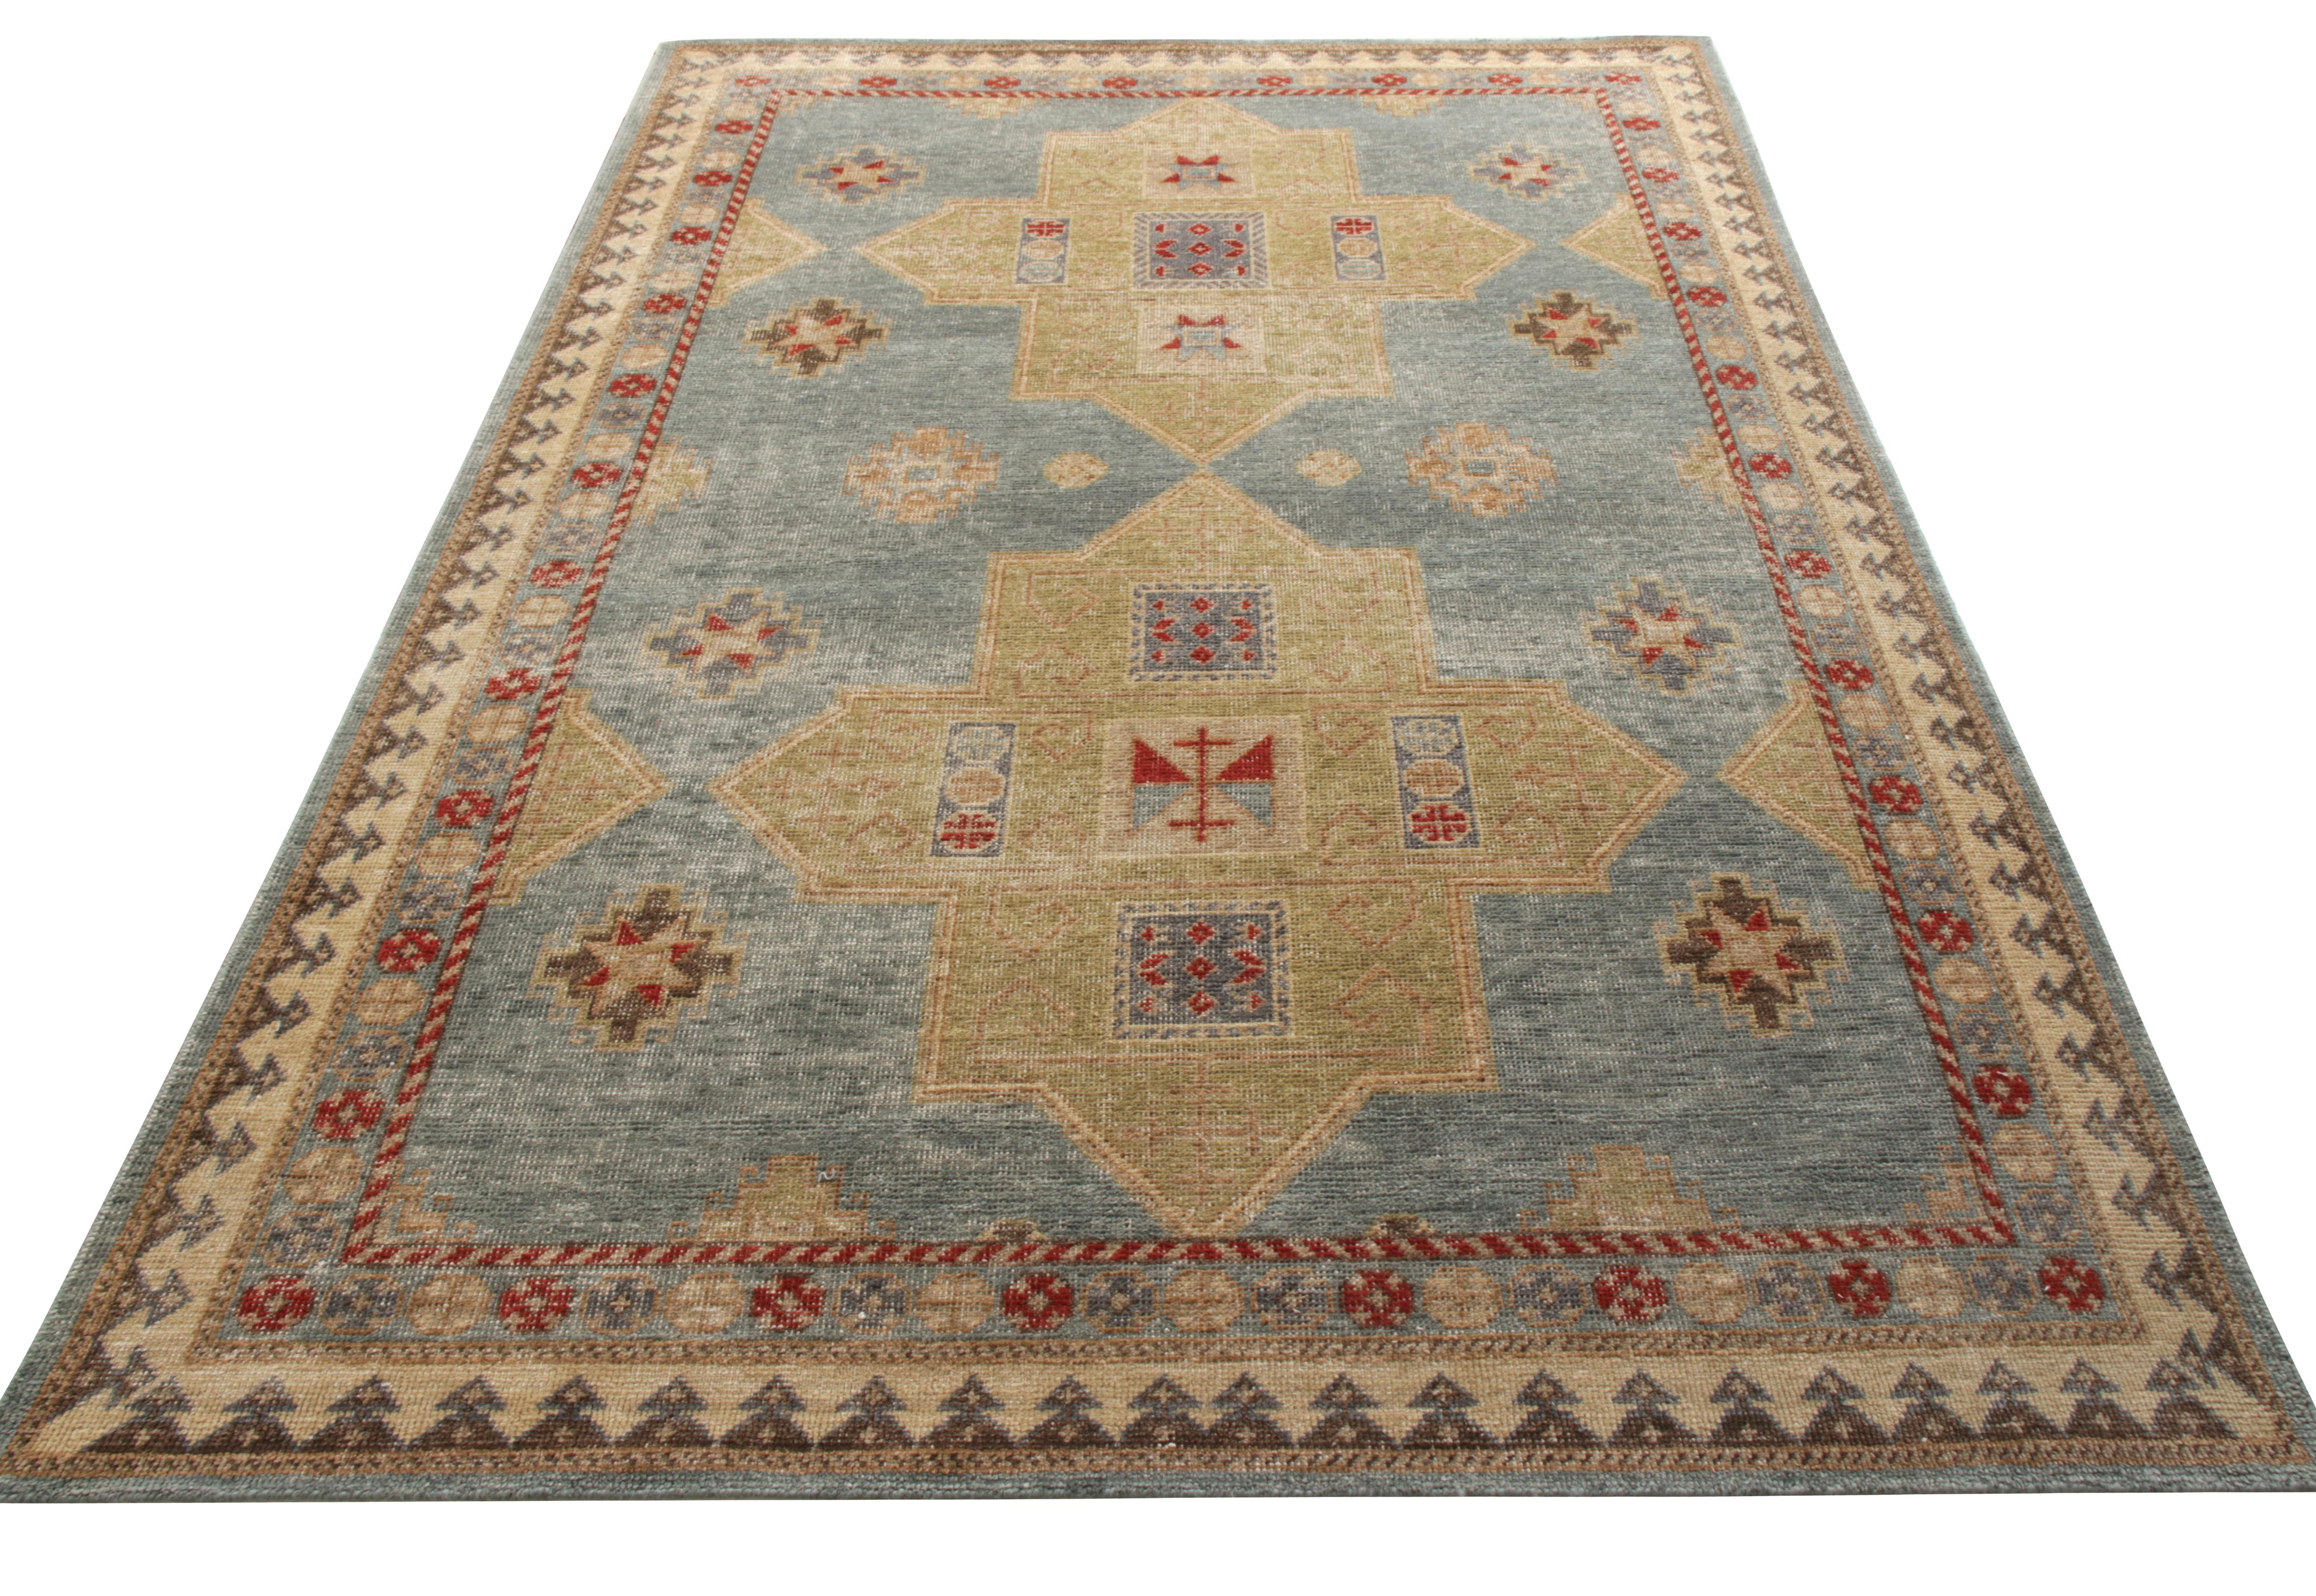 Hand knotted in low-sheared wool, a 6 x 9 from the classic selections belonging to Rug & Kilim’s Homage Collection. The rug witnesses a harmonious union of an all over traditional geometric patterns with a soothing blue and olive green colorway